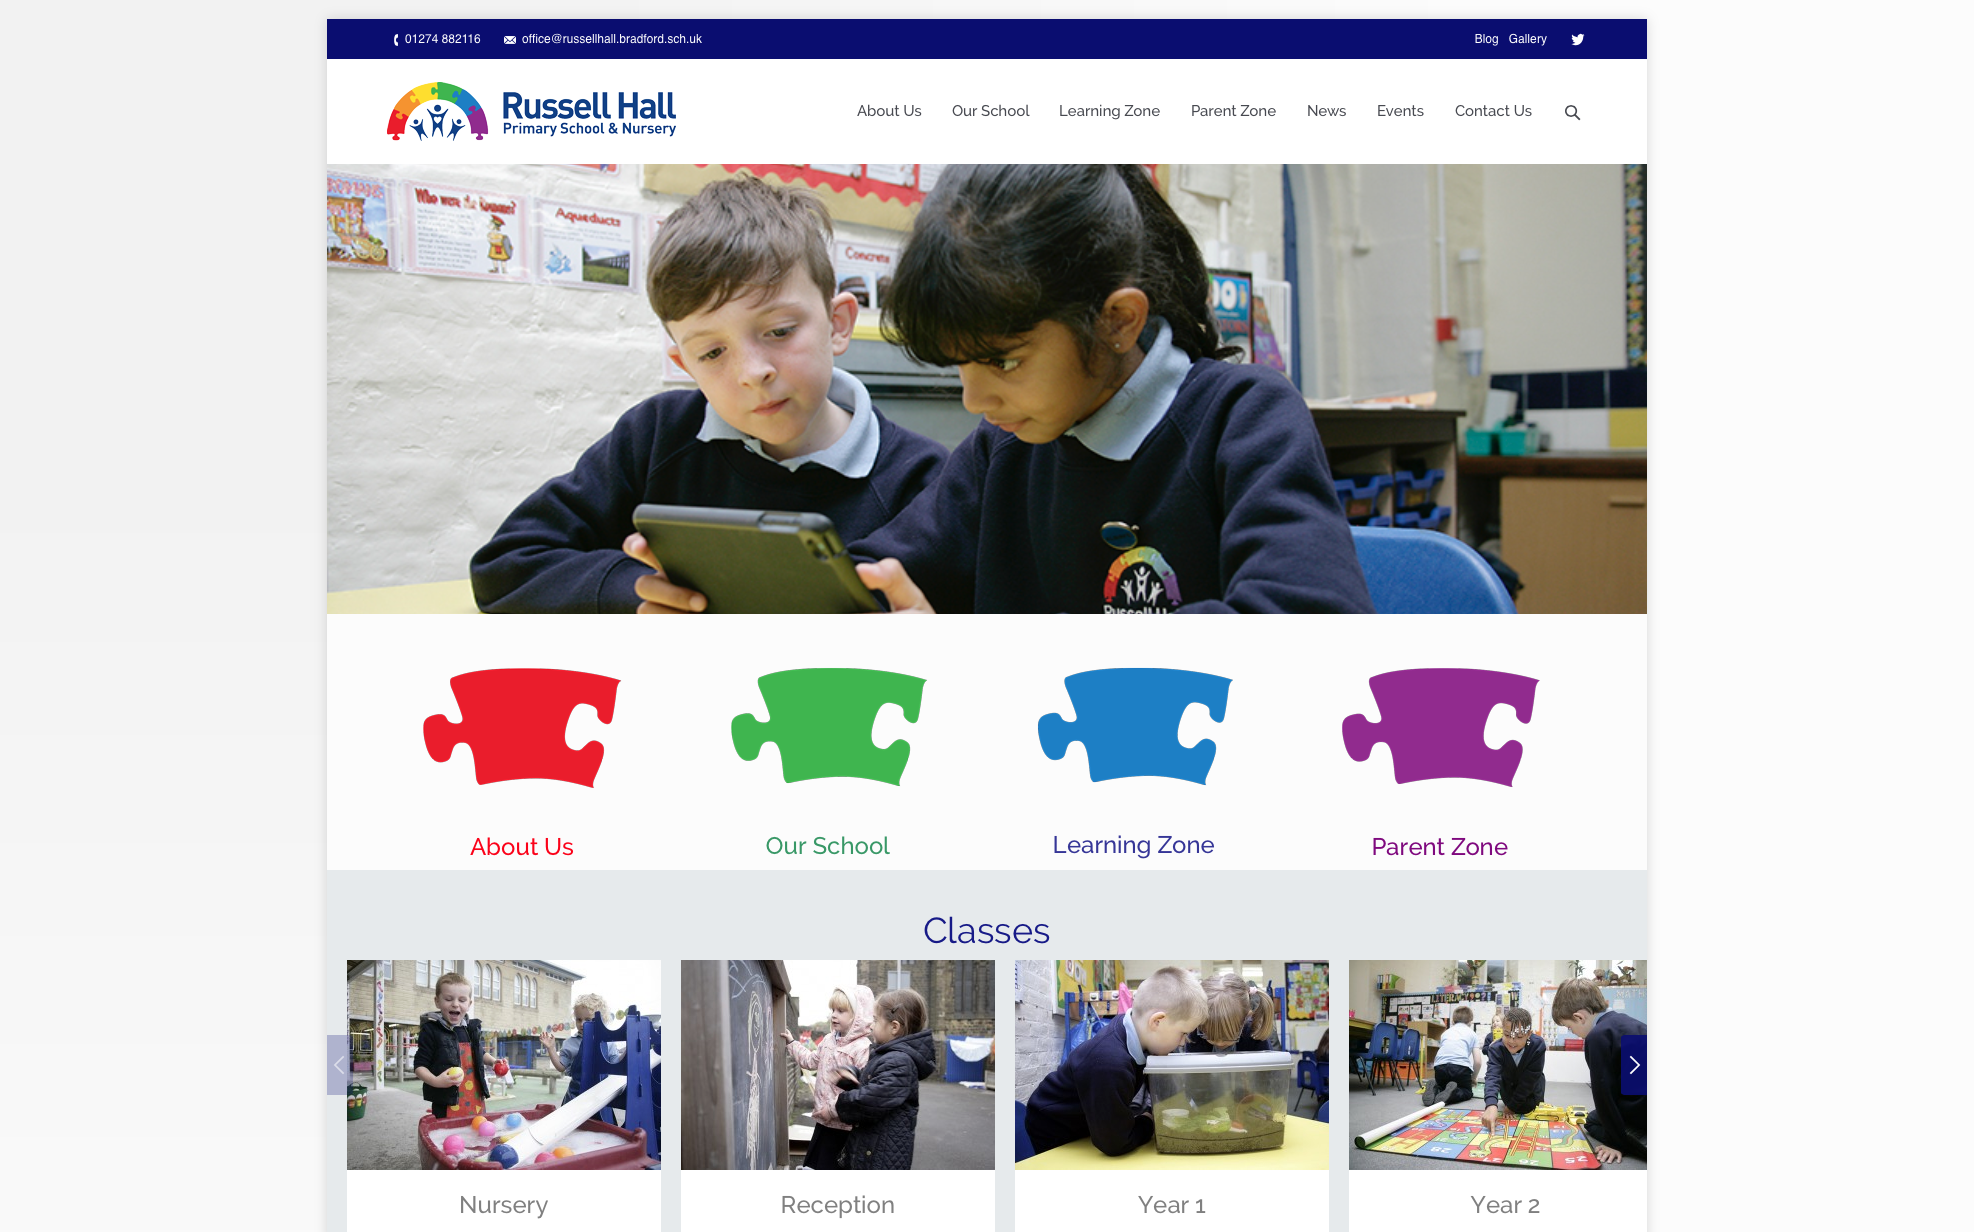 Why A Website Plays A Key Role In Marketing A School